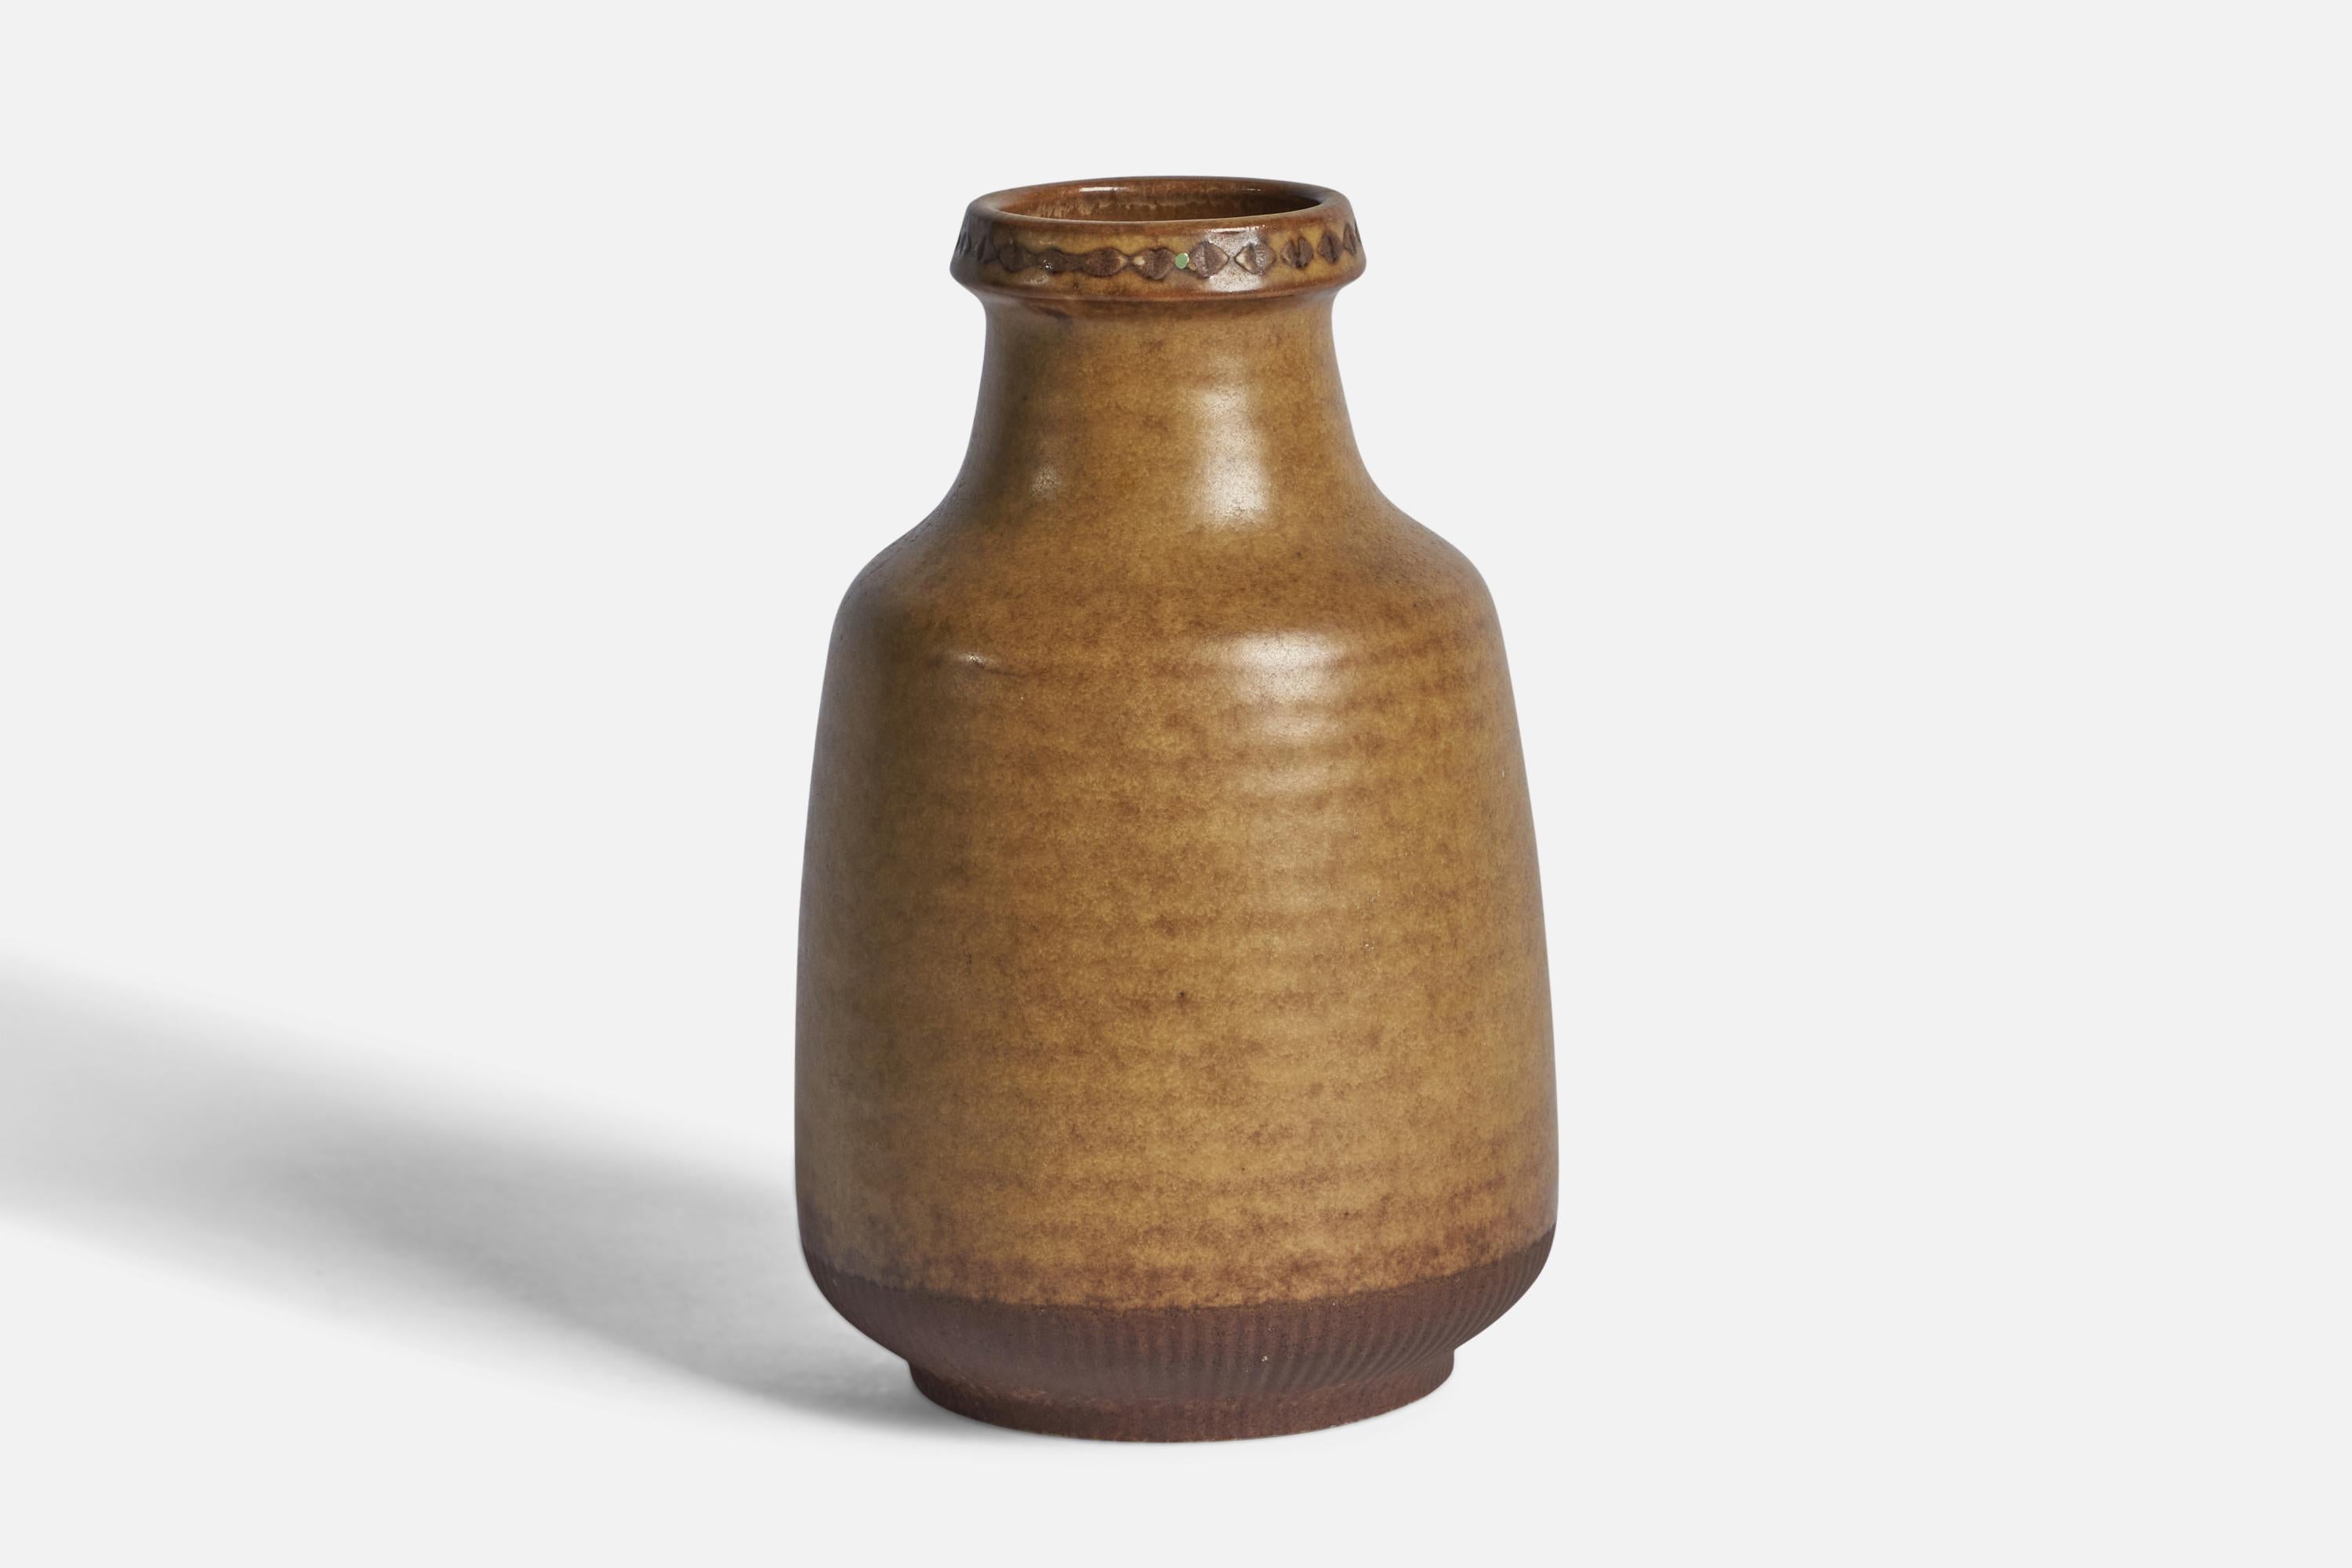 A beige-glazed stoneware vase designed by Gunnar Nylund and produced by Rörstrand, Sweden, 1940s.